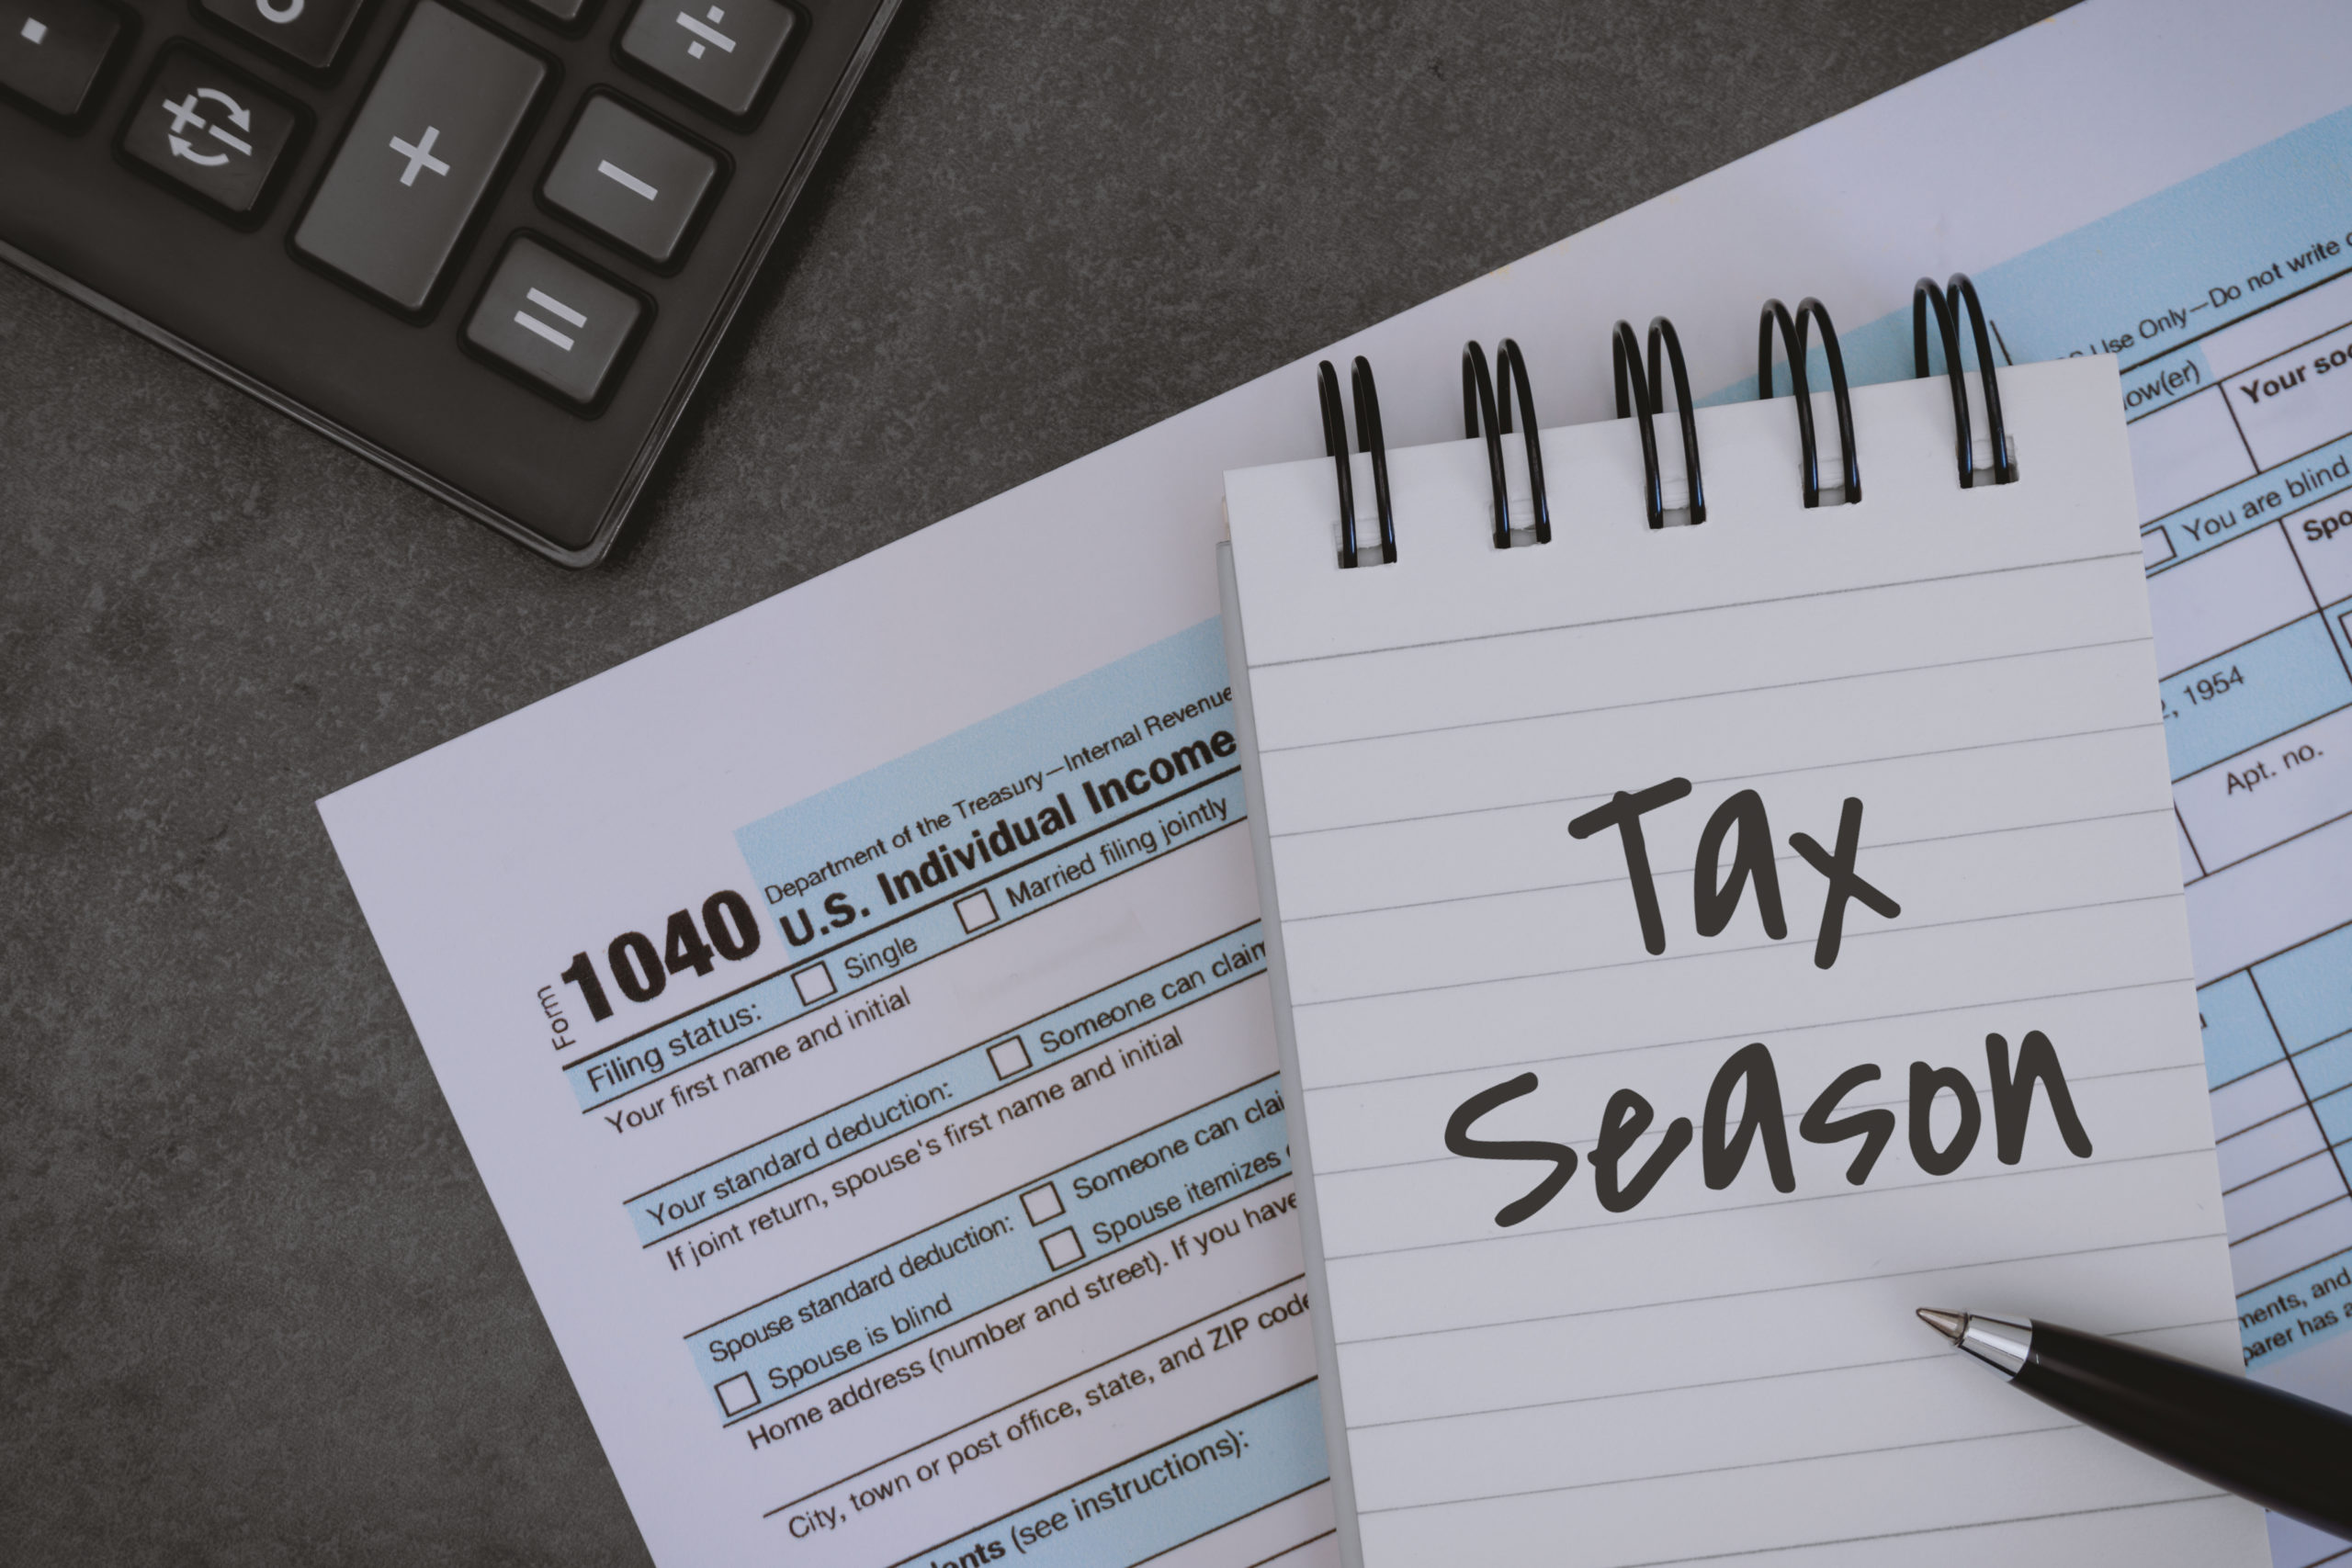 The U.S. income tax deadline is coming soon. Here's what you need to know.